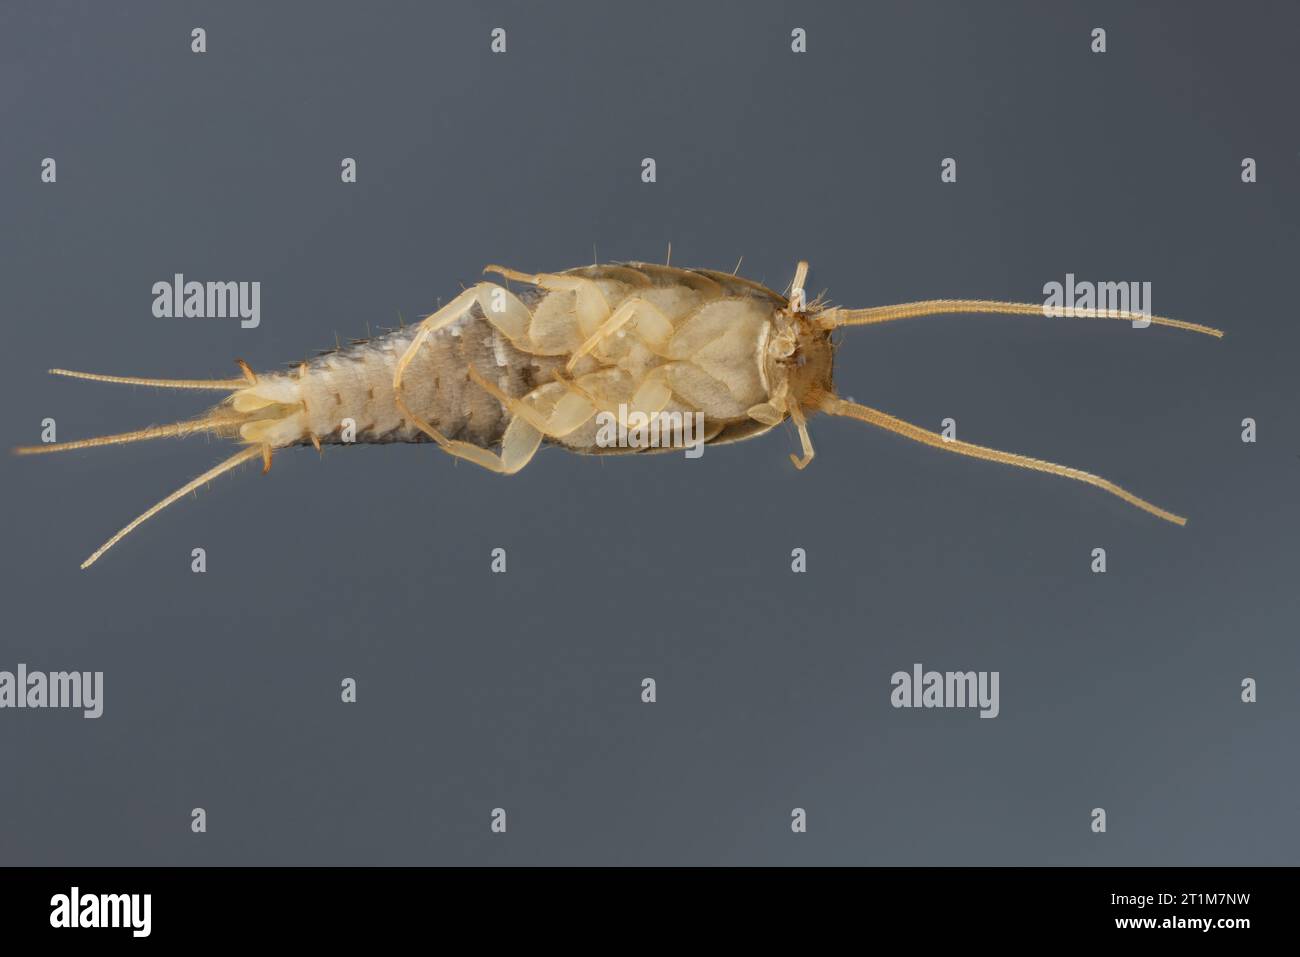 Silverfish (Lepisma saccharina), adult. Visible underside of the body. Stock Photo